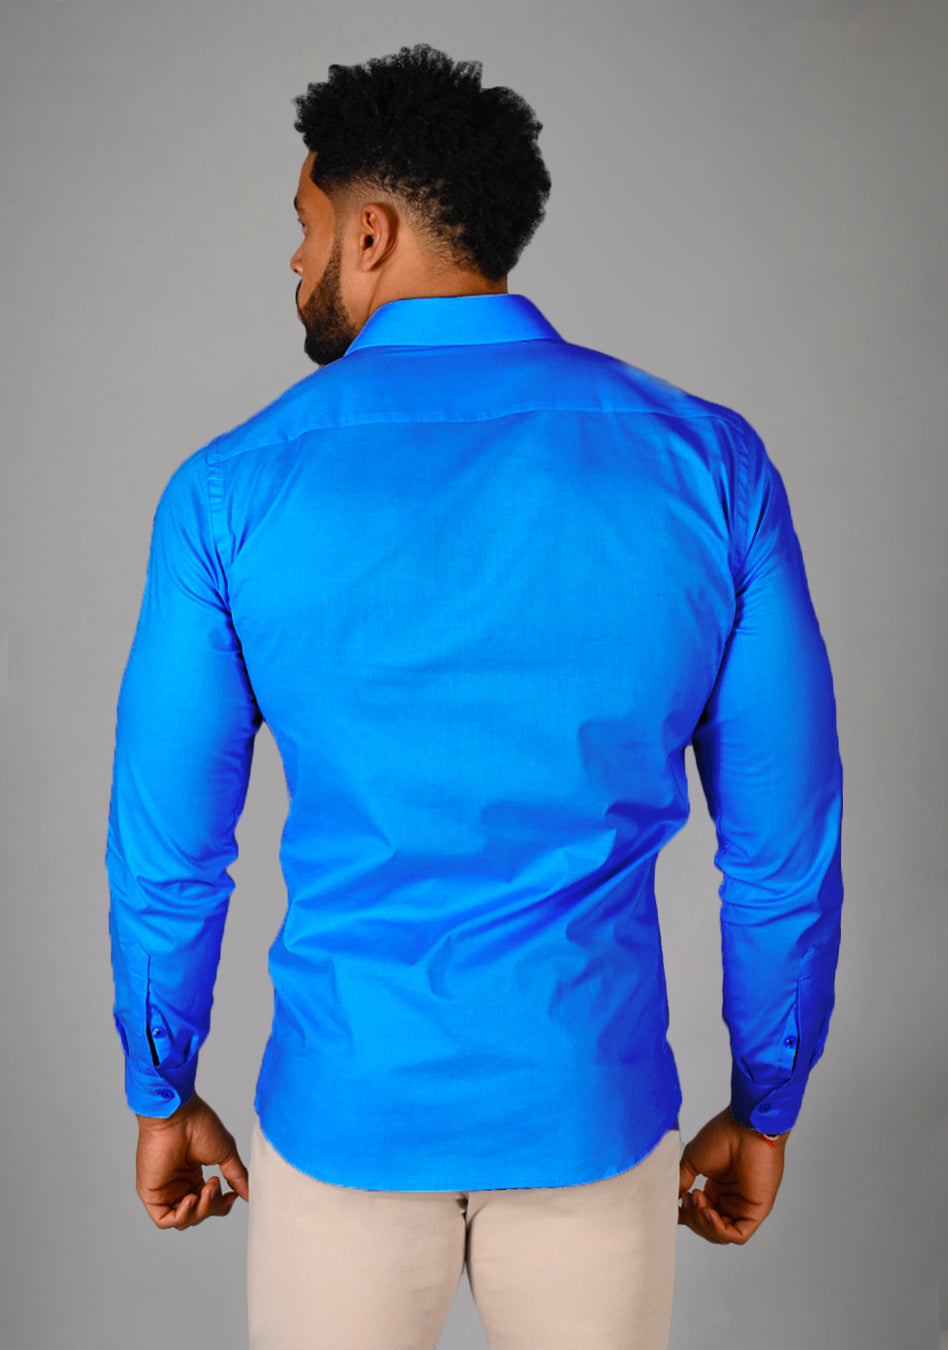 Electric Blue athletic fit shirt on an athletically built model, showcasing the muscle fit design that enhances physique, with stretch fabric for comfort and mobility